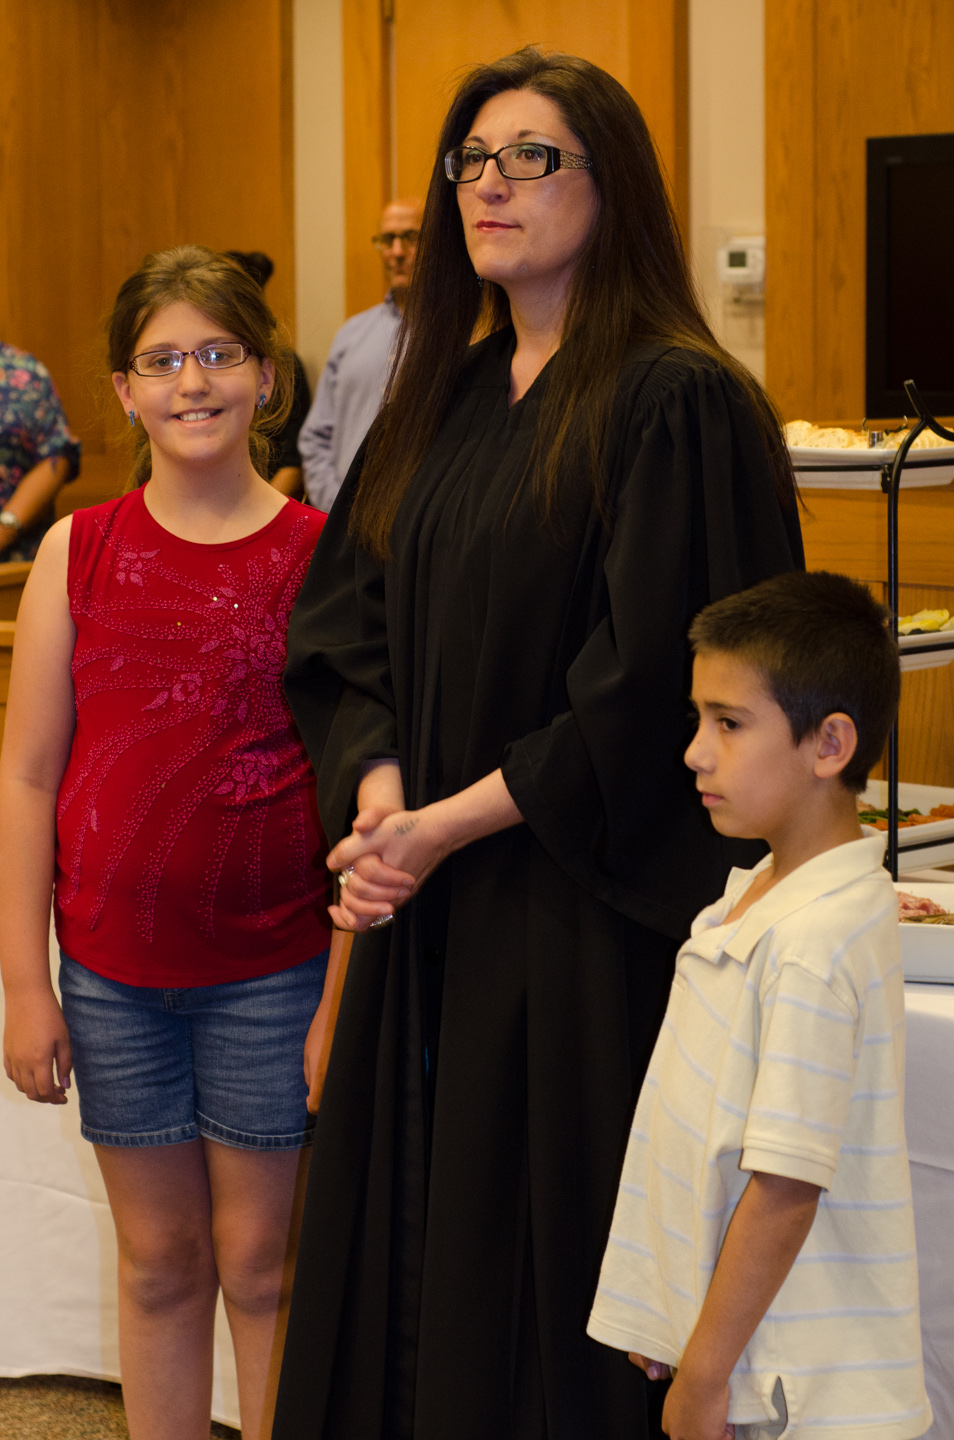 Judge Cloud stands with her family during the reception.